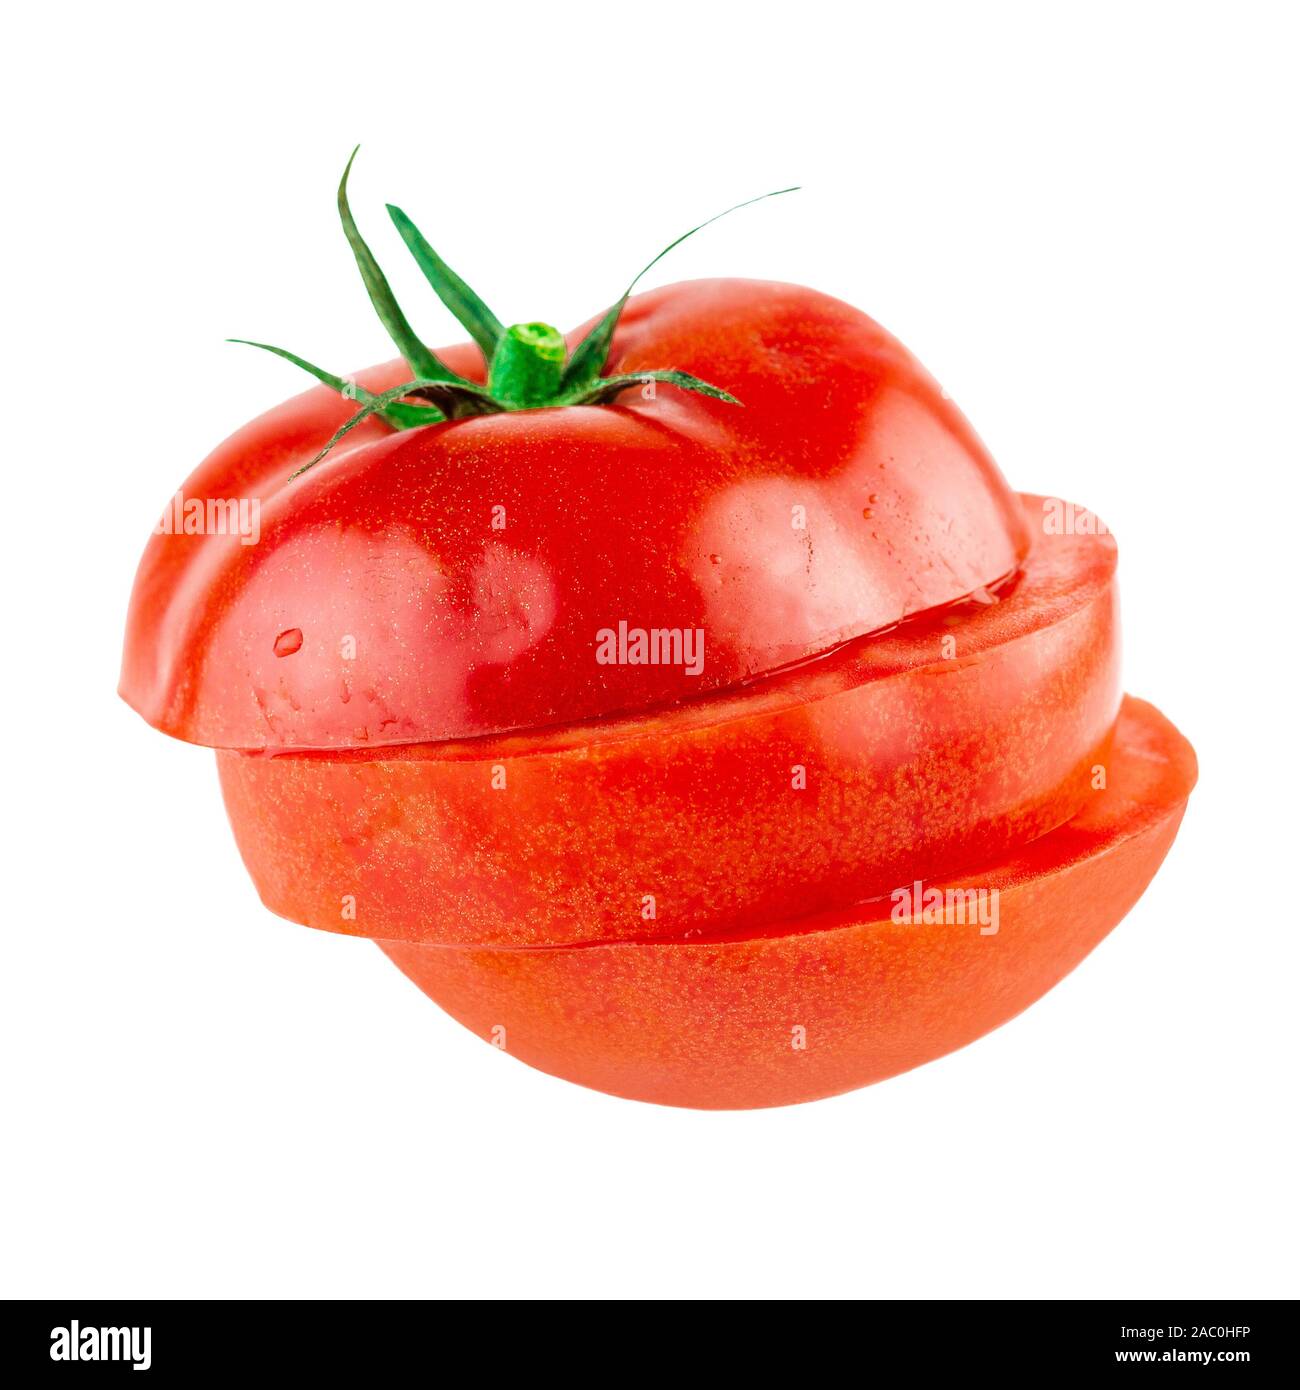 Tomato sliced in a pile isolated on white Stock Photo